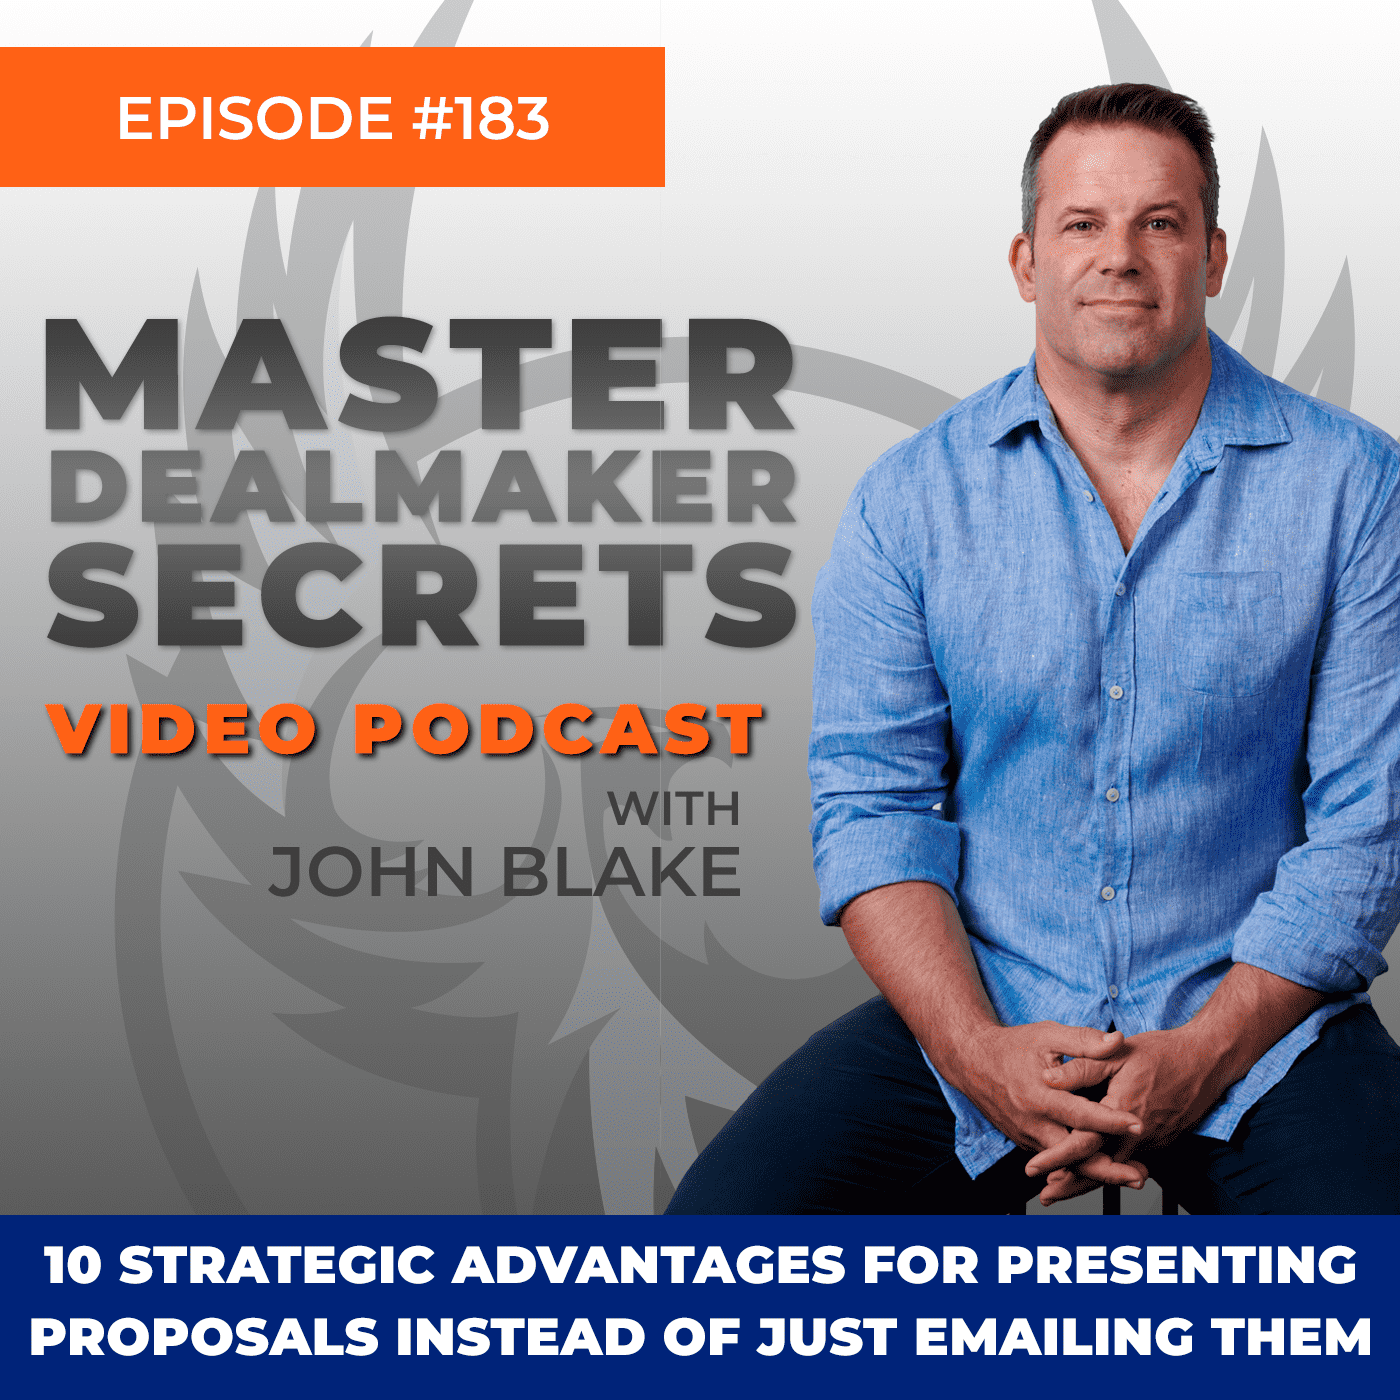 John Blake 10 Strategic Advantages for Presenting Proposals Instead of Just Emailing Them